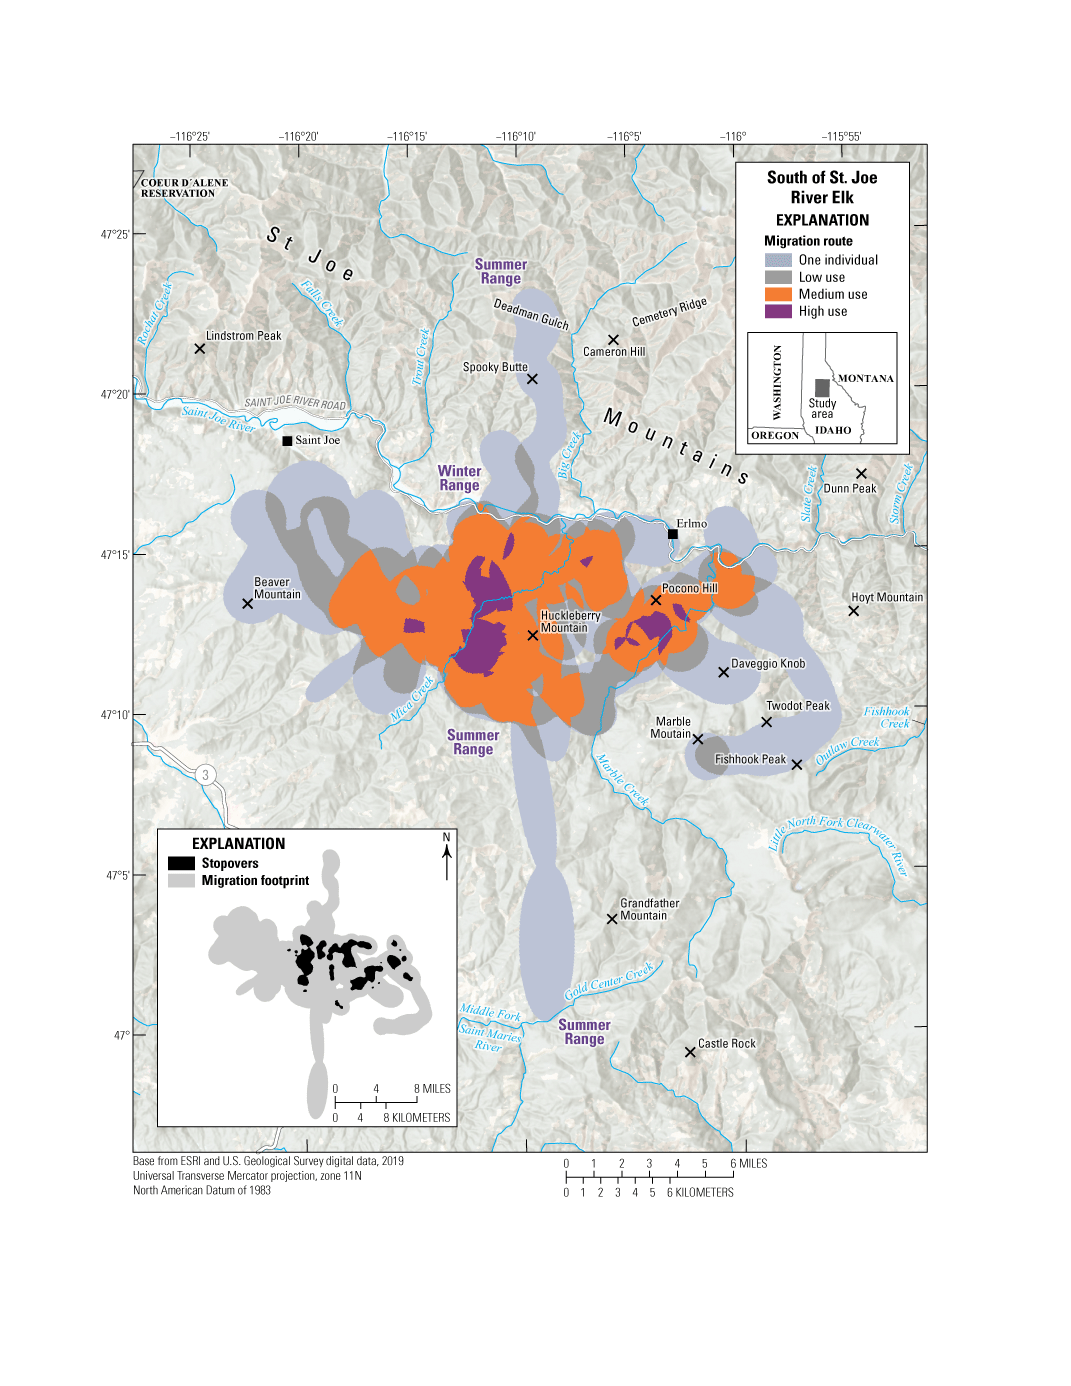 Figure 44. Migration routes and stopovers of the South of Saint Joe River elk herd.